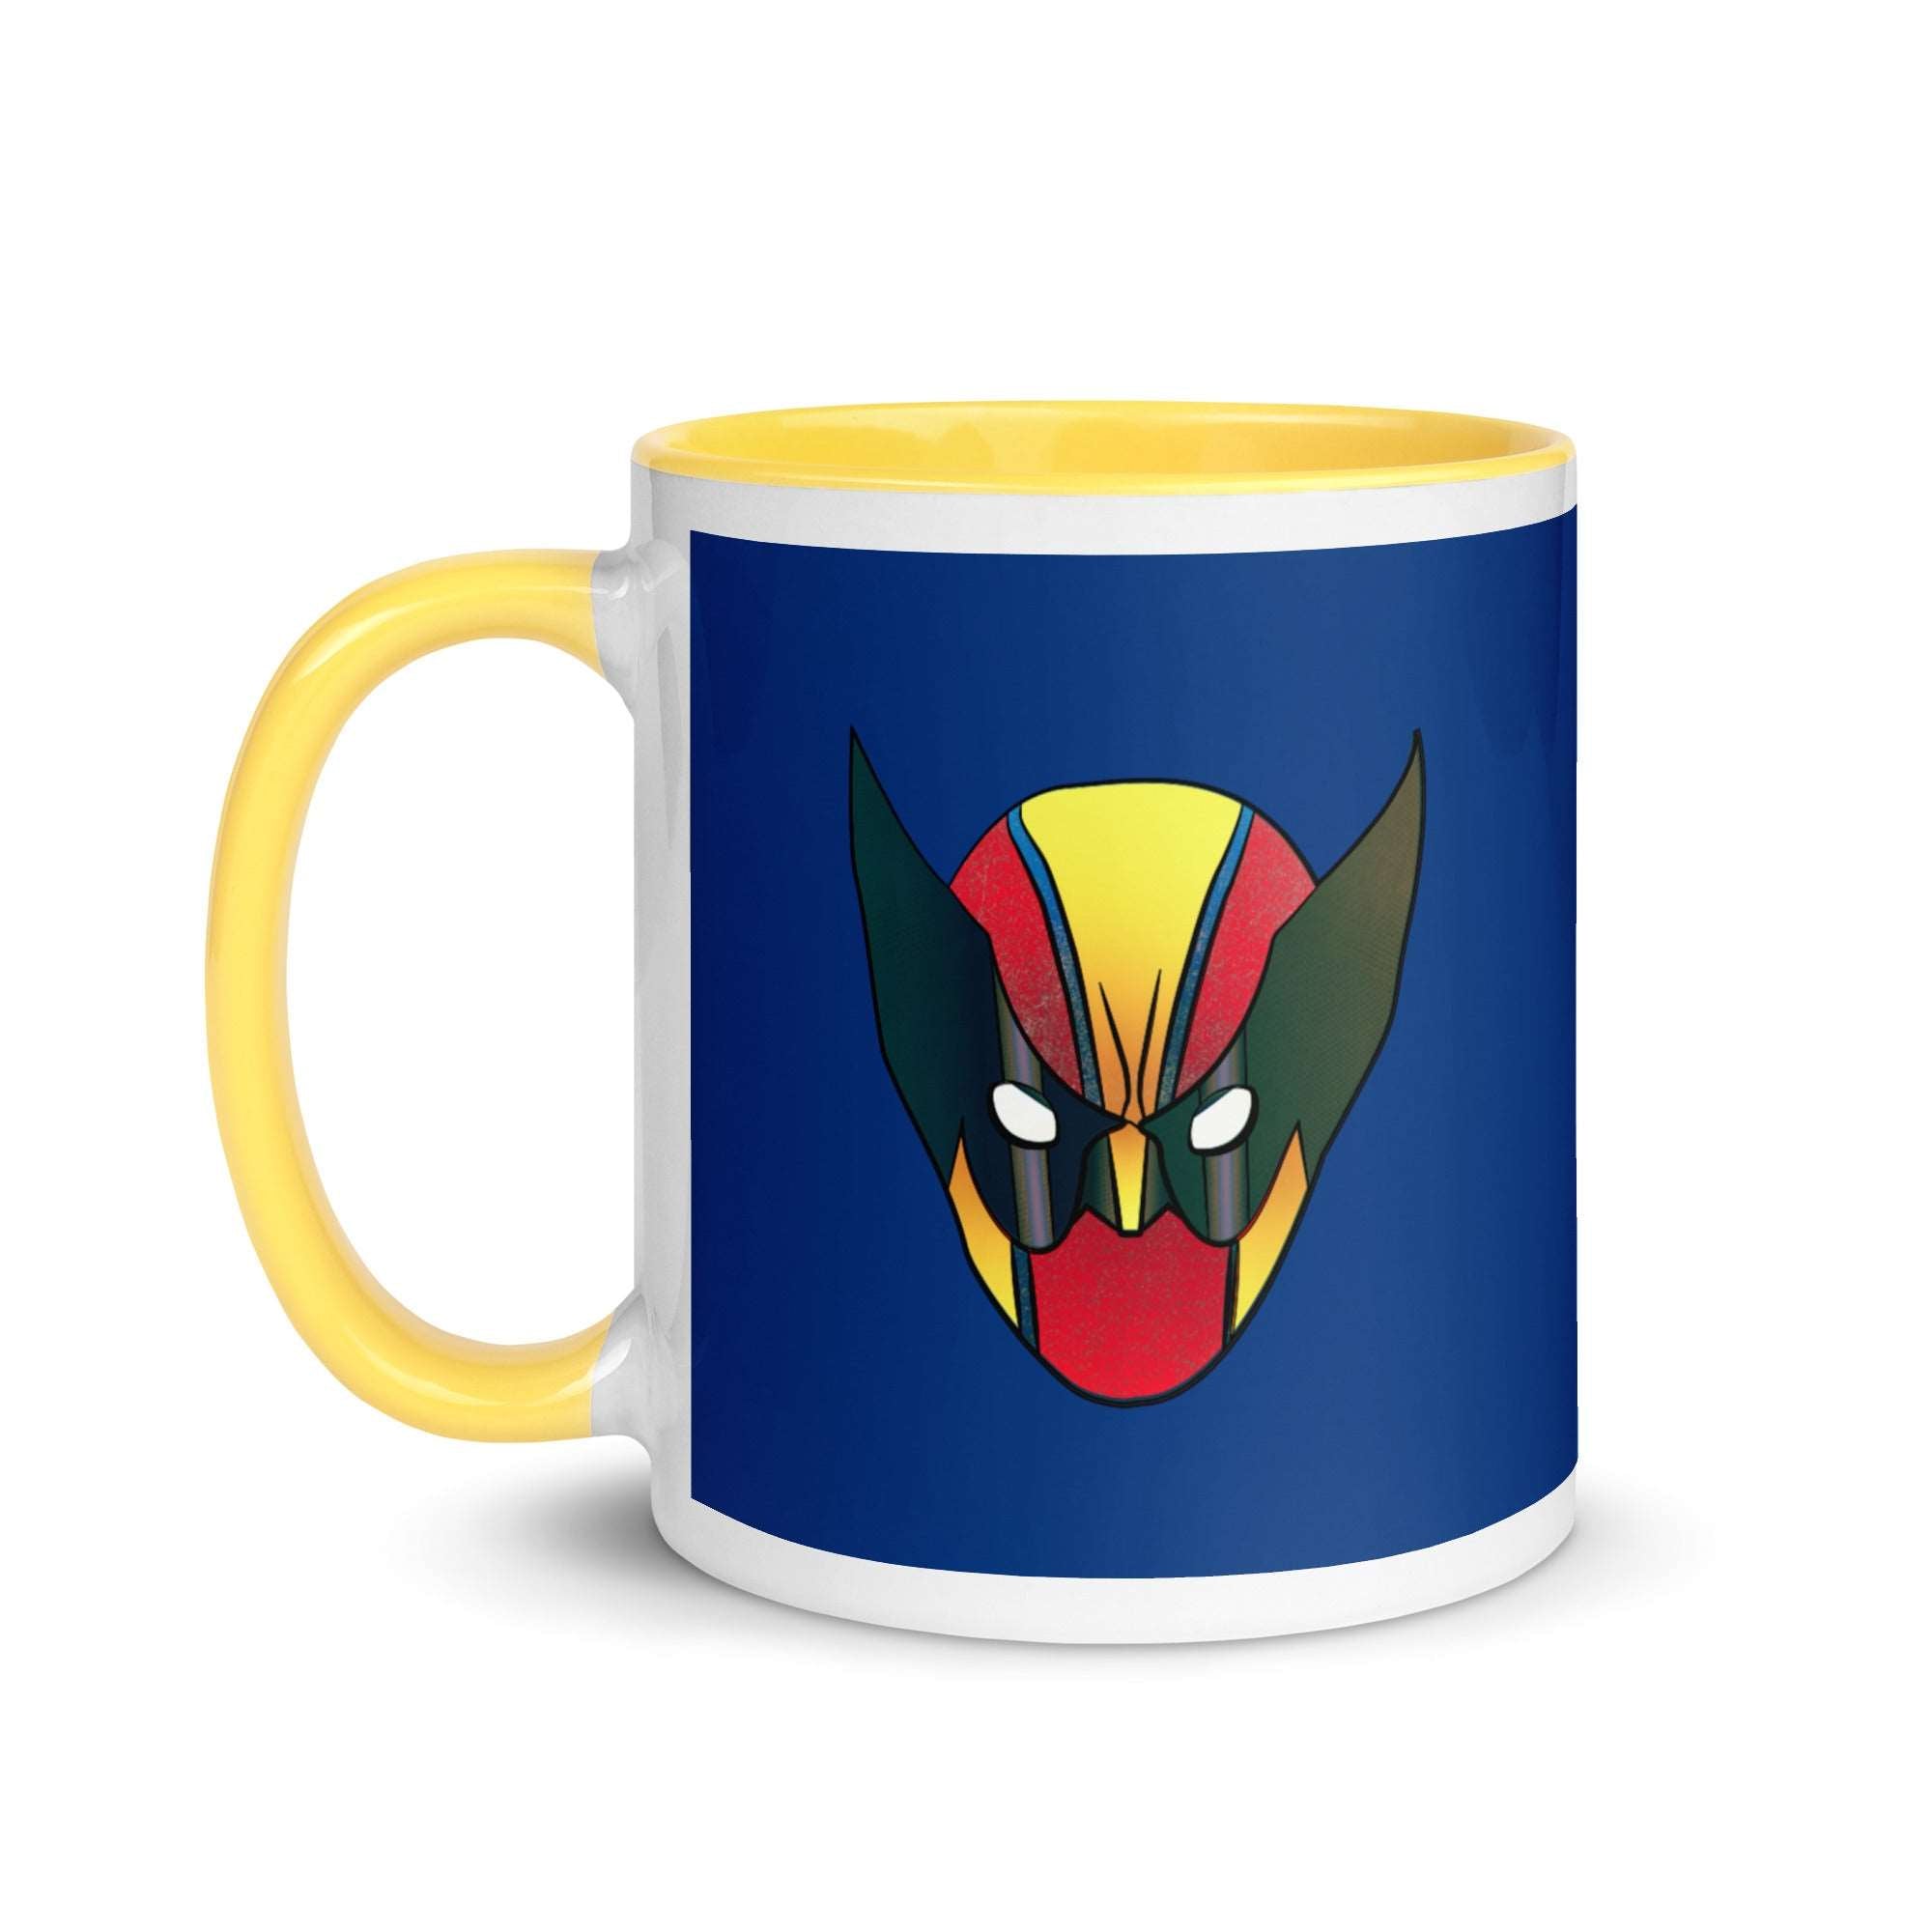 a blue and white mug with a wolverine face on it